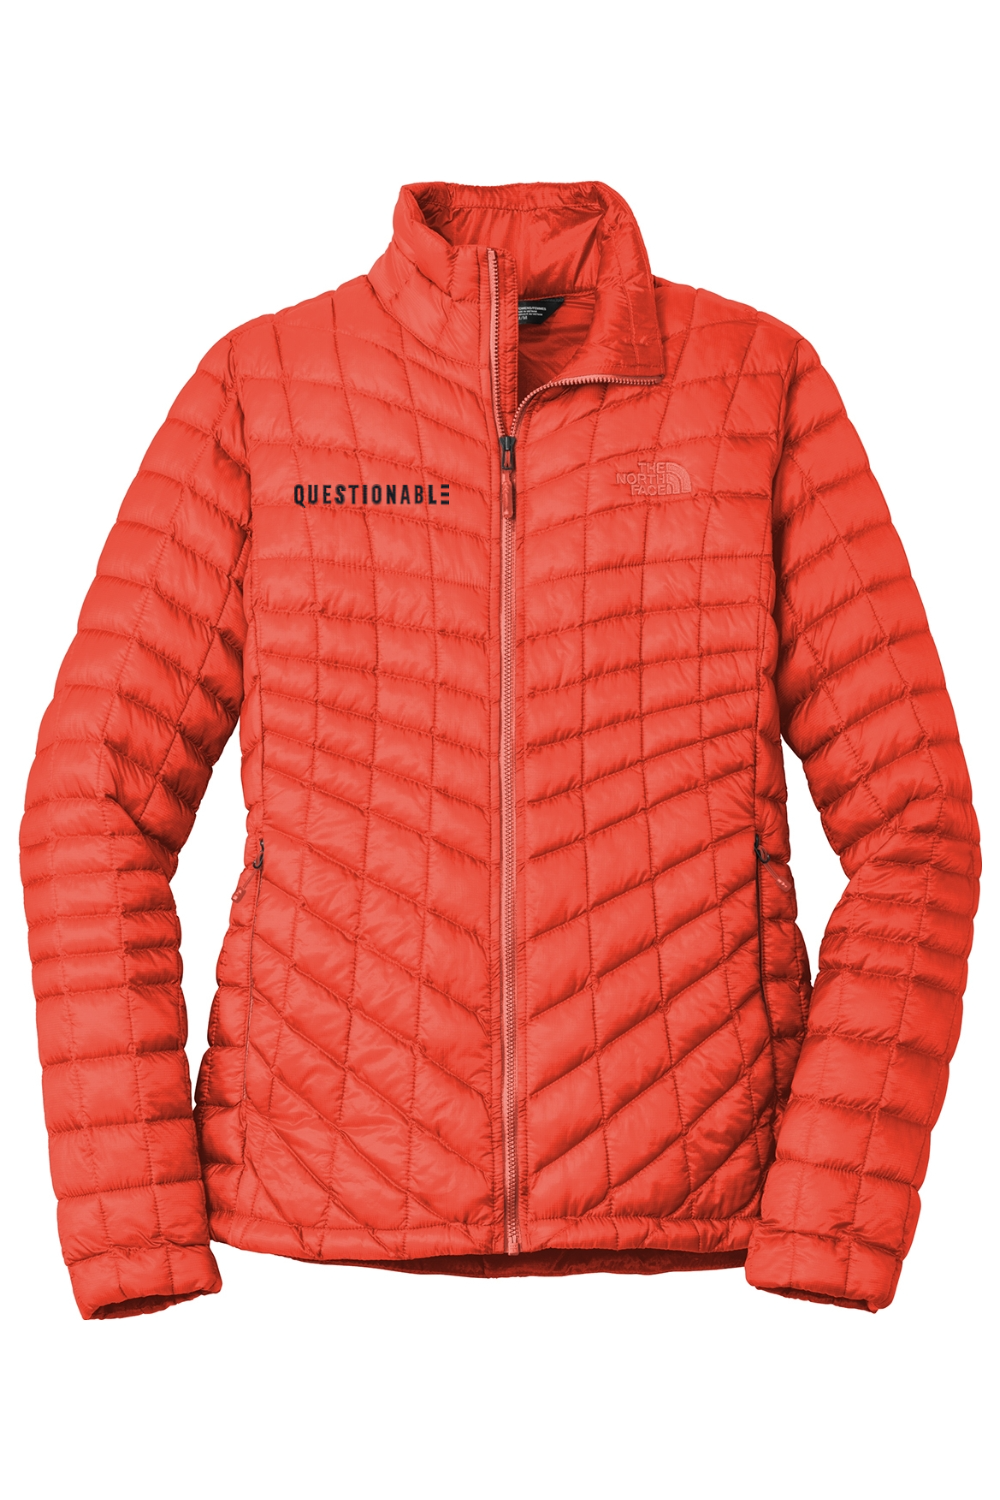 Questionable - The North Face Ladies ThermoBall Jacket